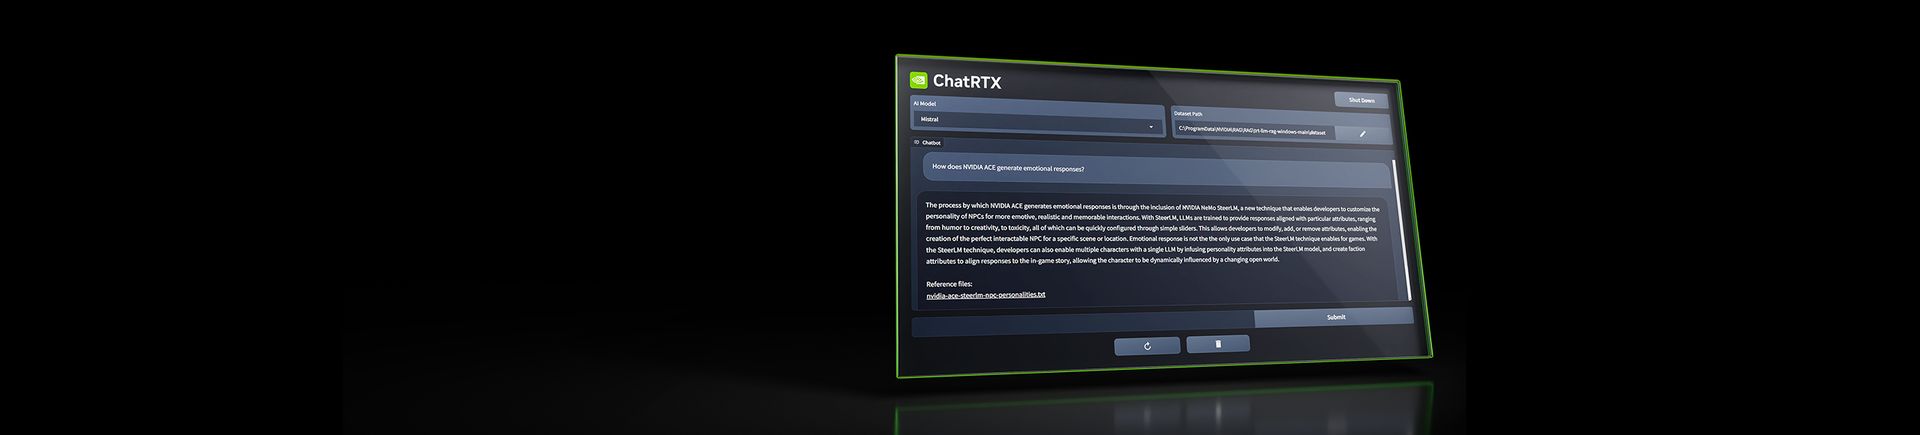 What is NVIDIA ChatRTX and how to use it